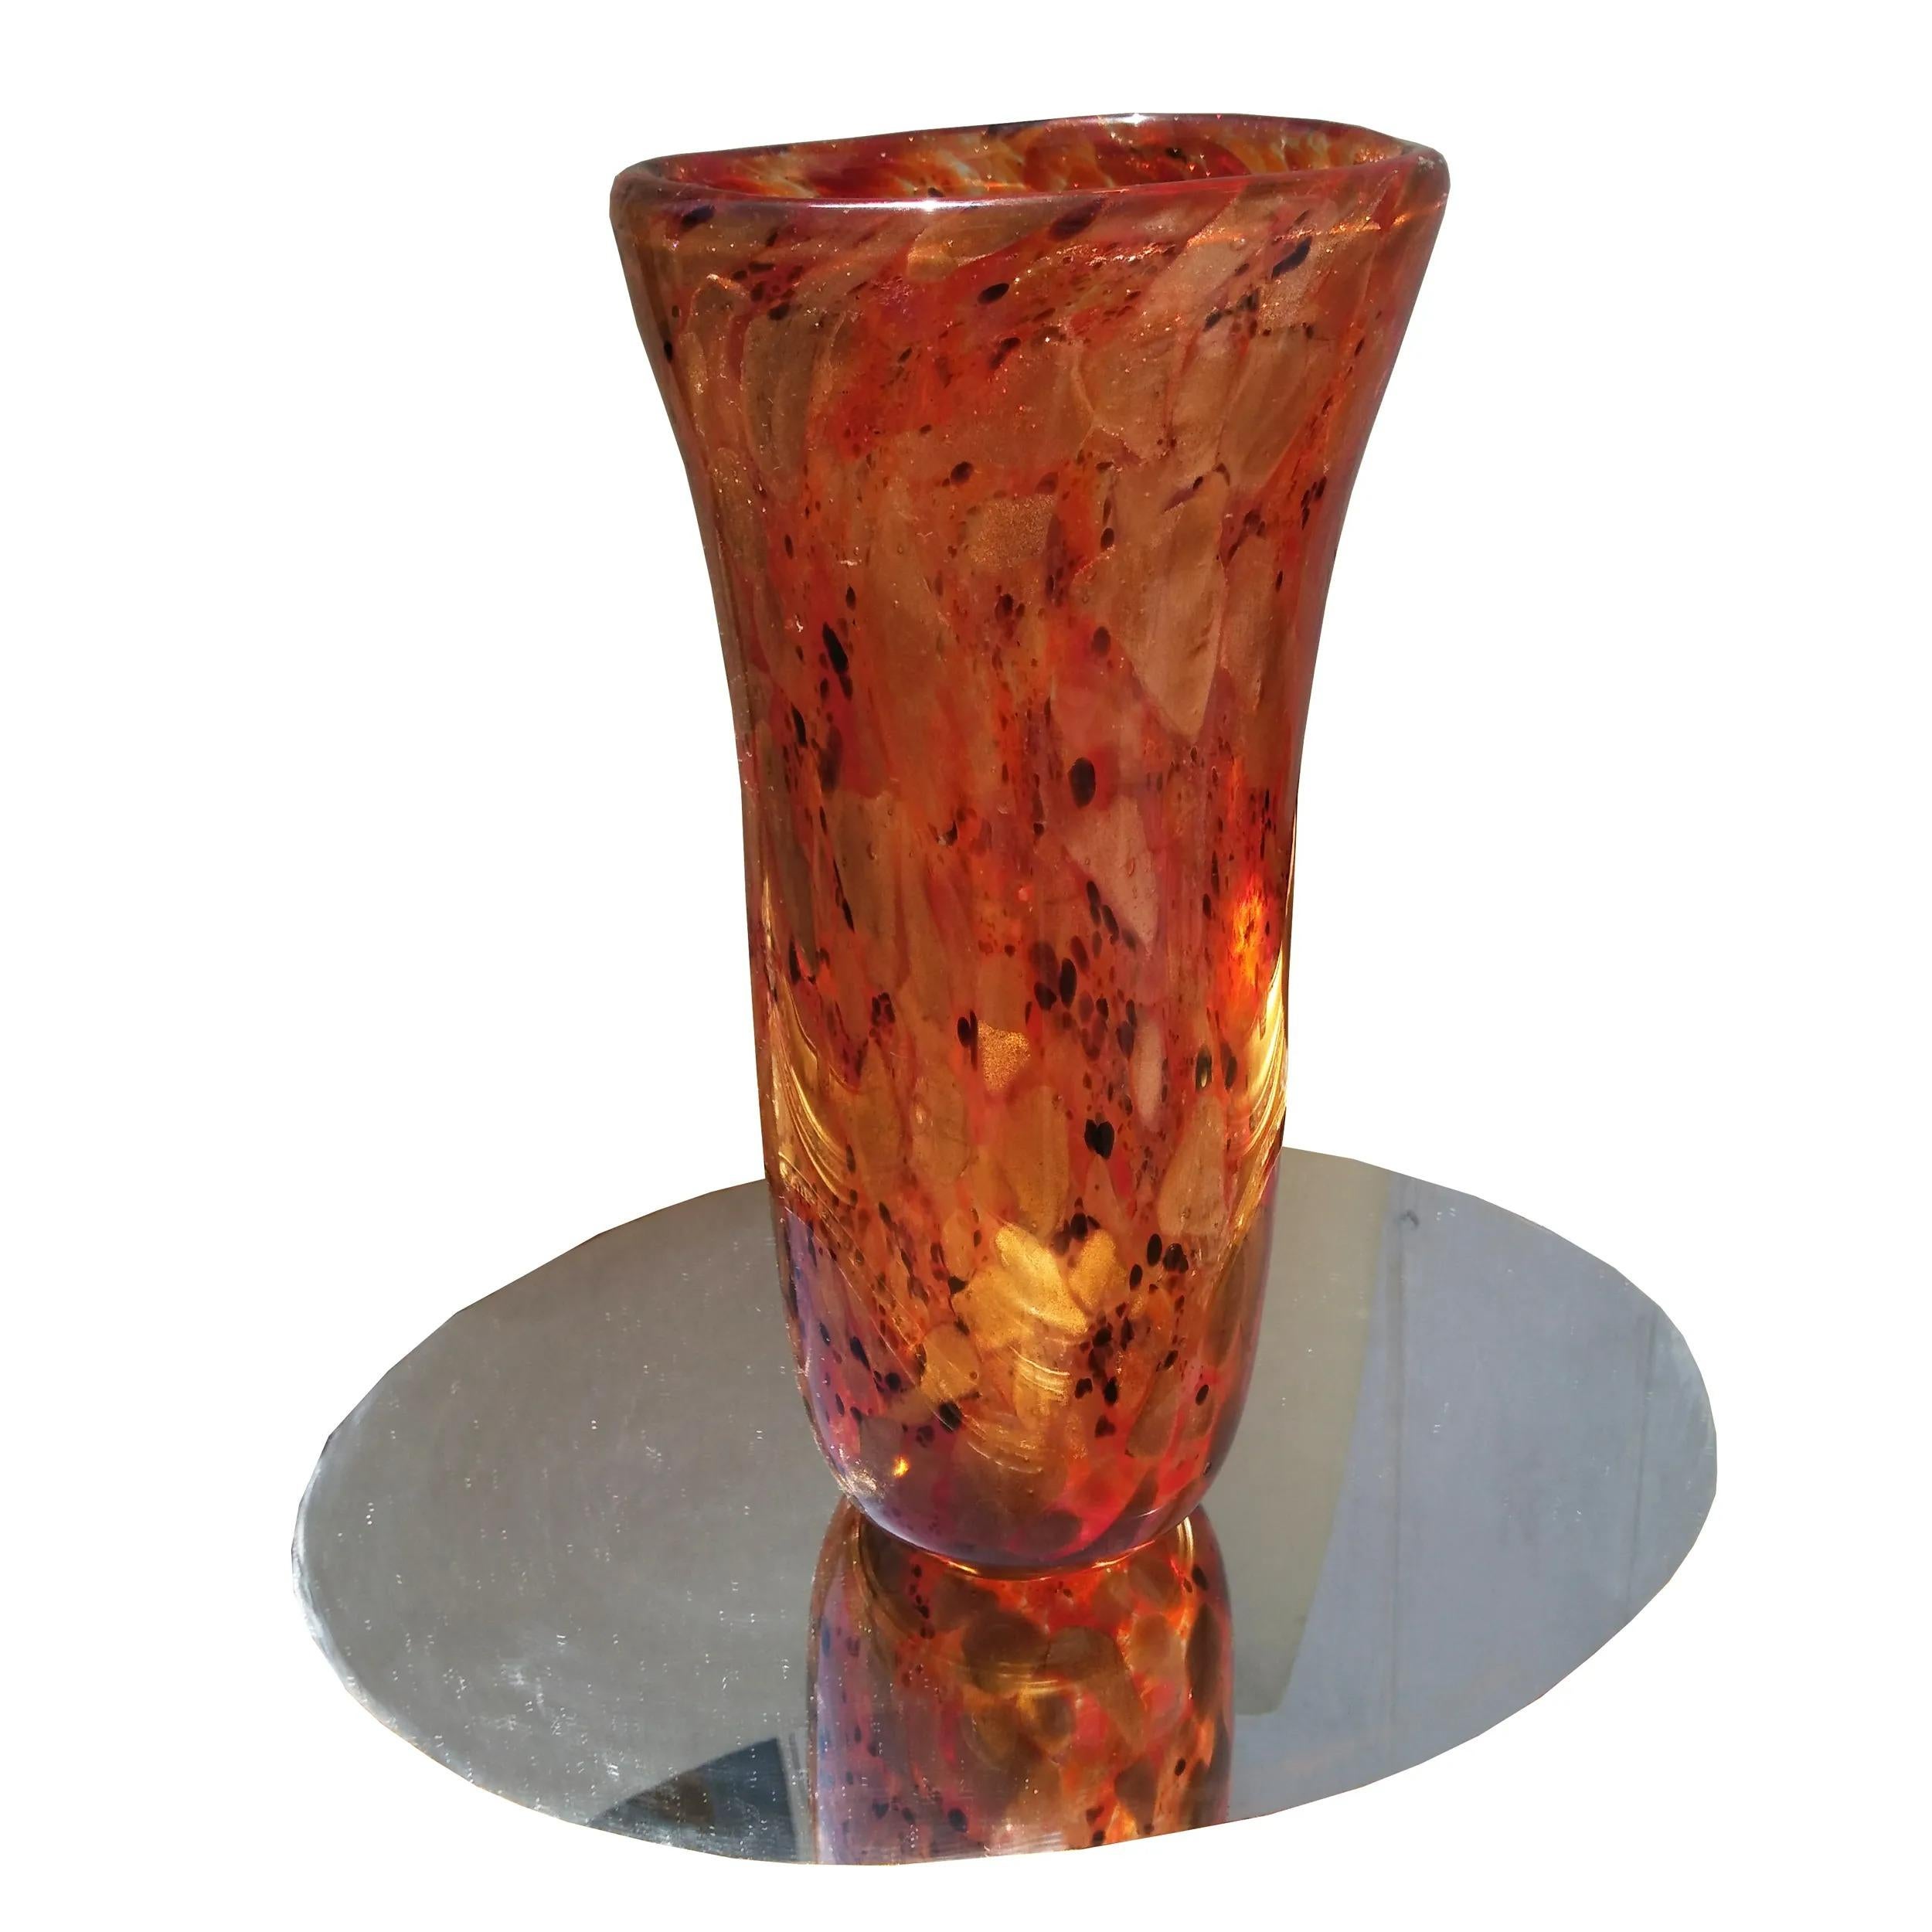 11 7/8? Amber Gold Murano Vase

Golden amber colored with black accents vase, circa 1990s Features flared top and standing approximately 12” high.